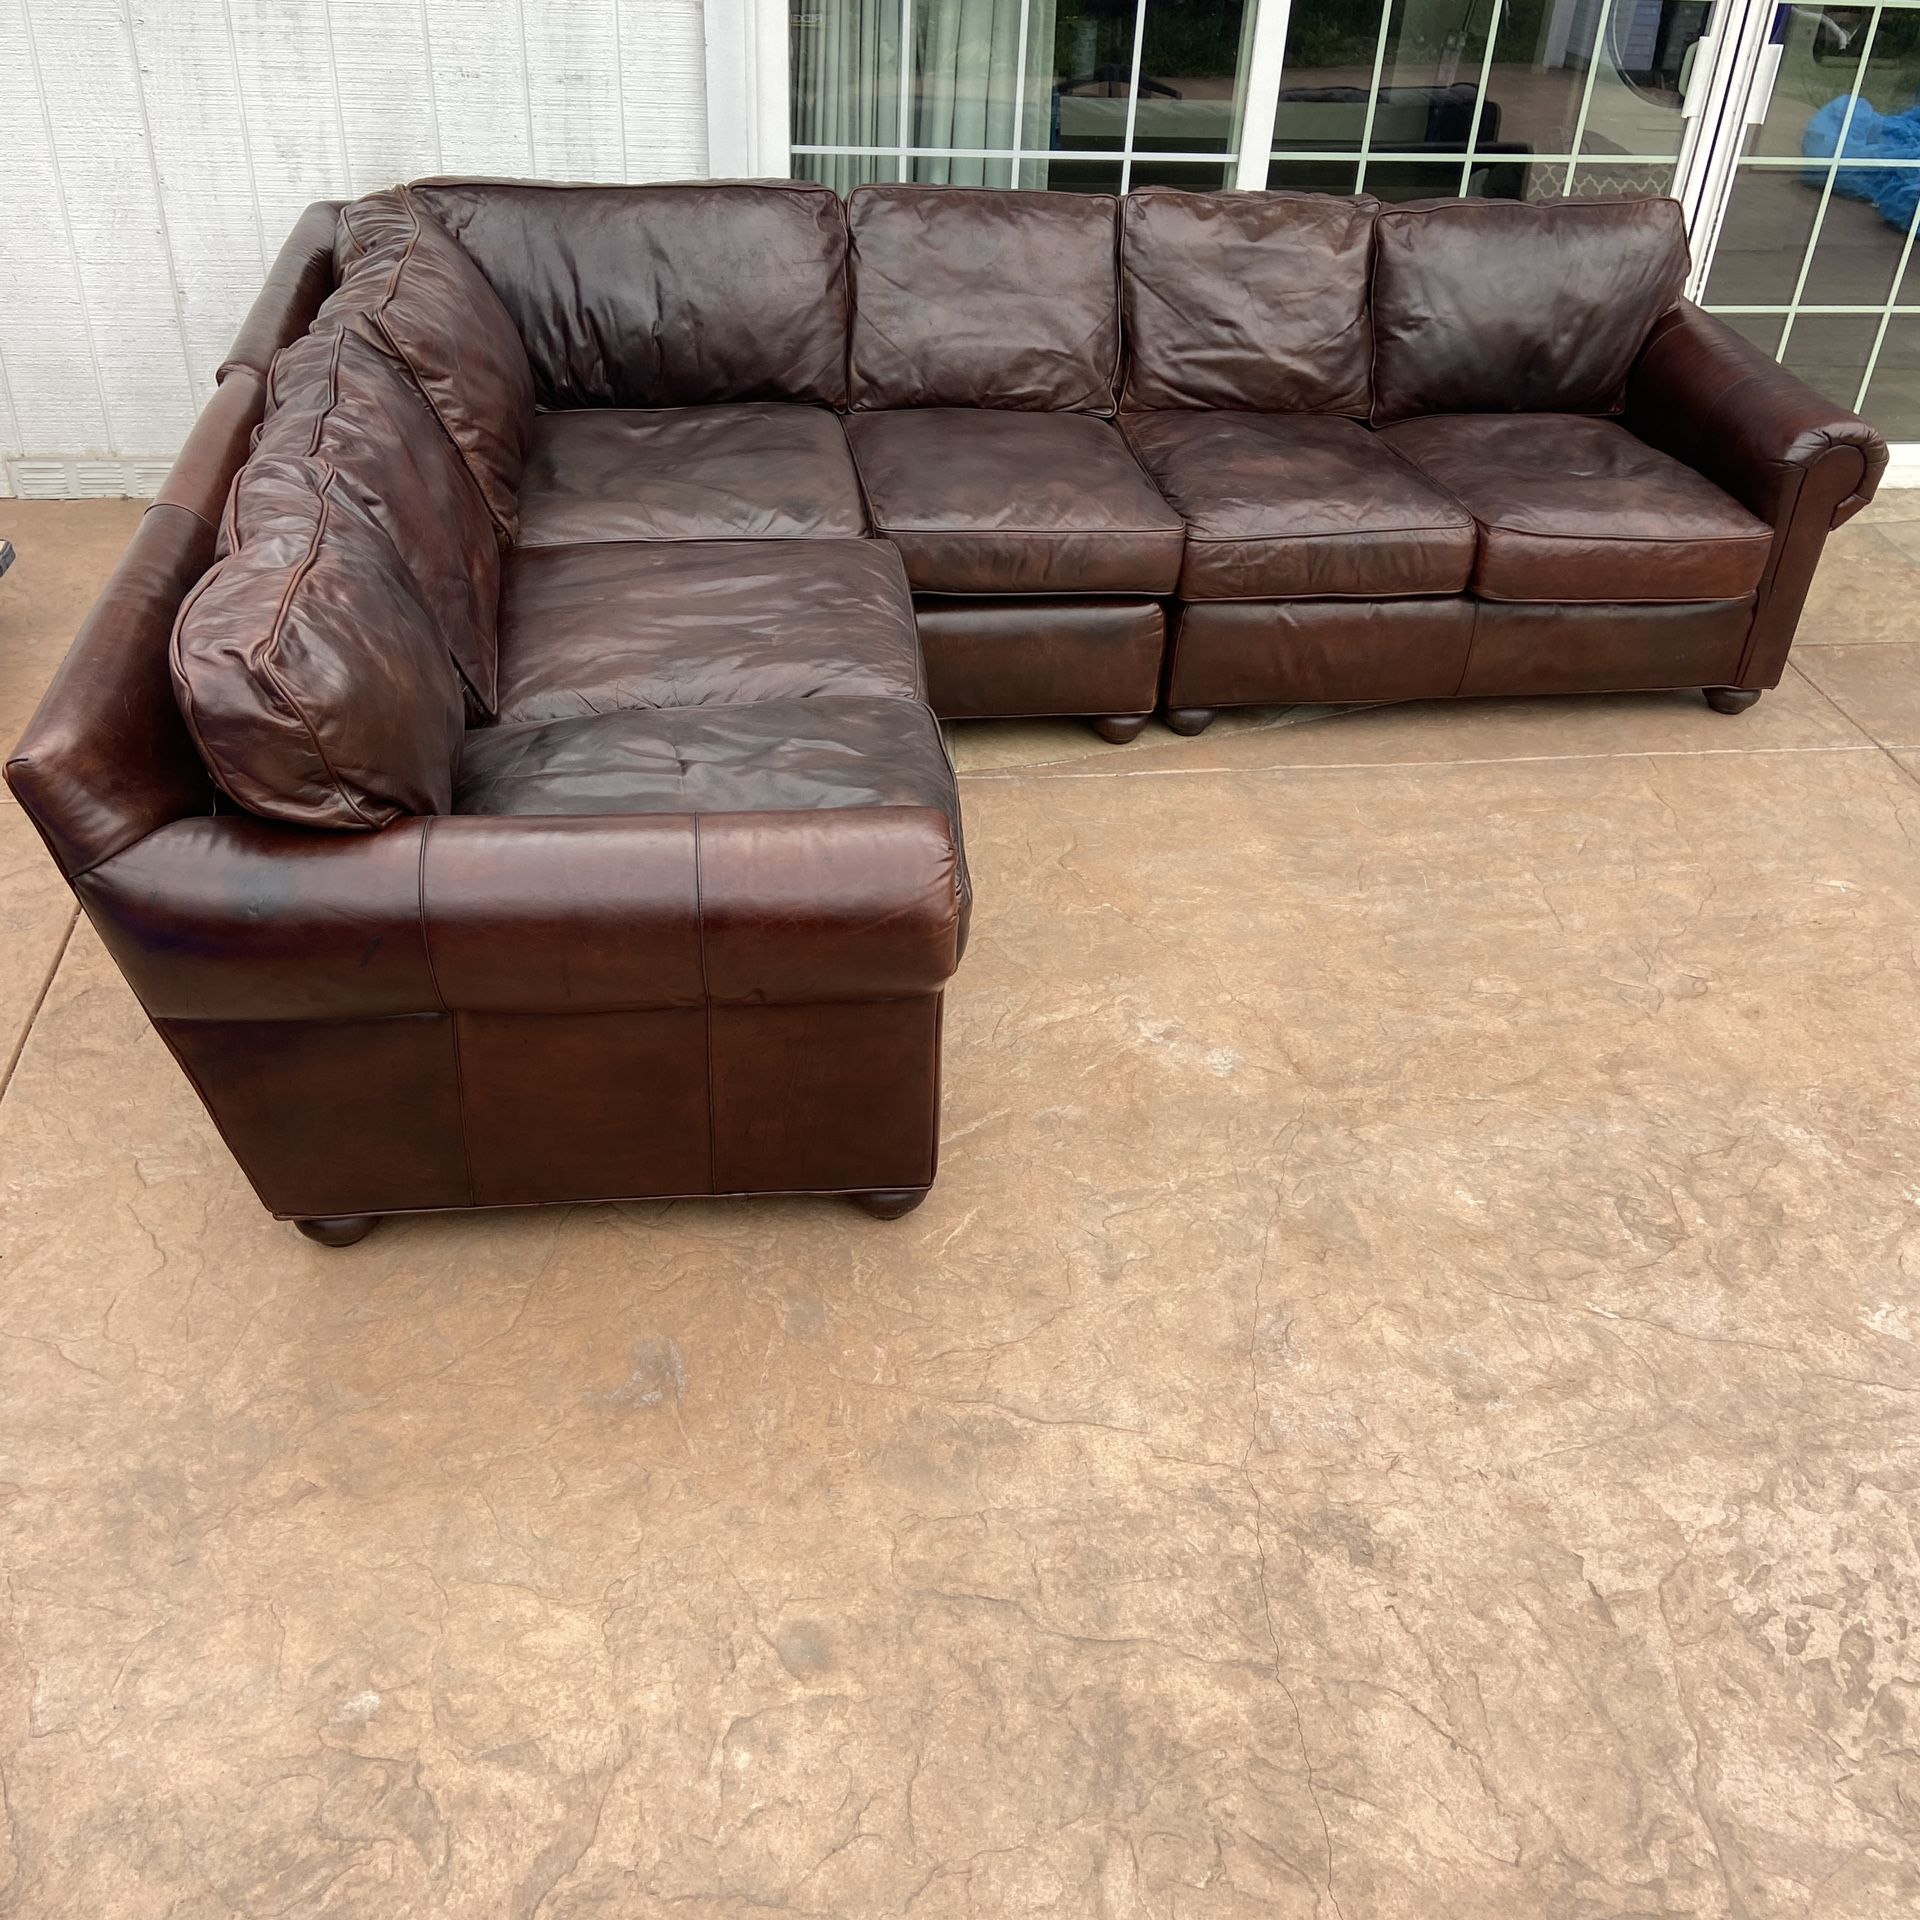 Restoration Hardware Lancaster Leather Sectional Sofa - Delivery Available